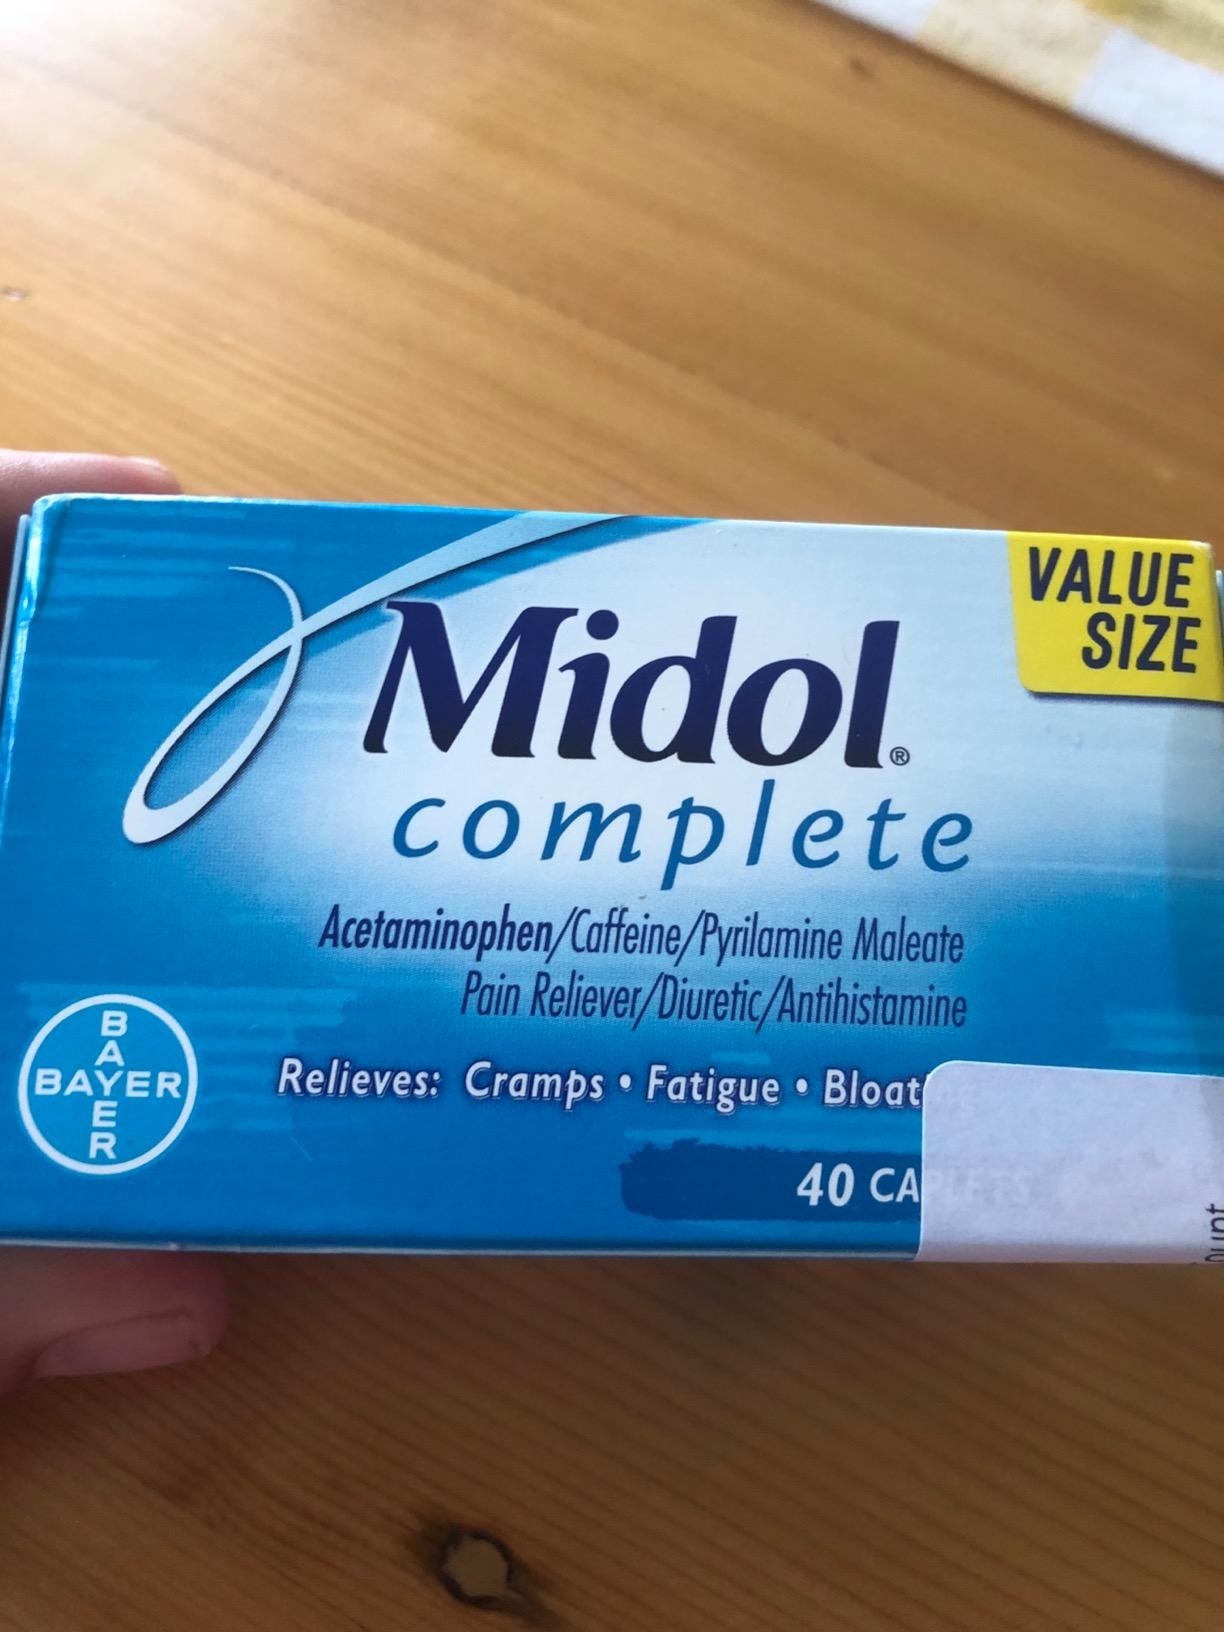 reviewer image of a box of midol complete